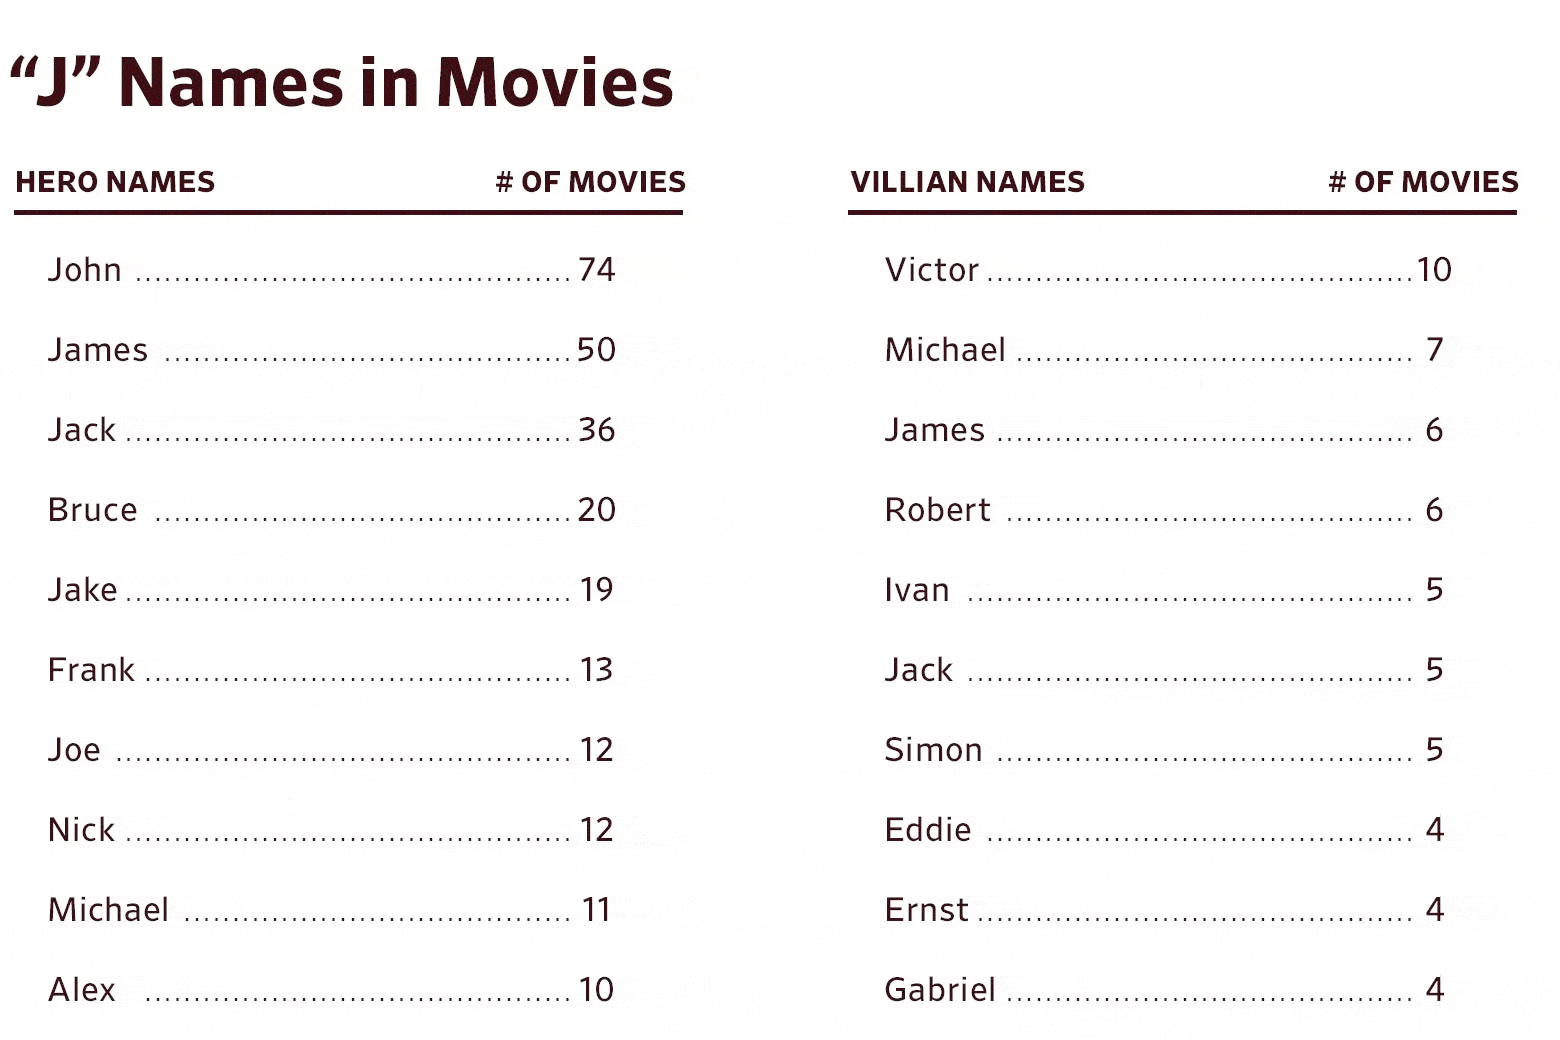 Chart, titled "J" Names in Movies, with John leading at 74 in the Heroes category and Victor leading with 10 in the Villains 